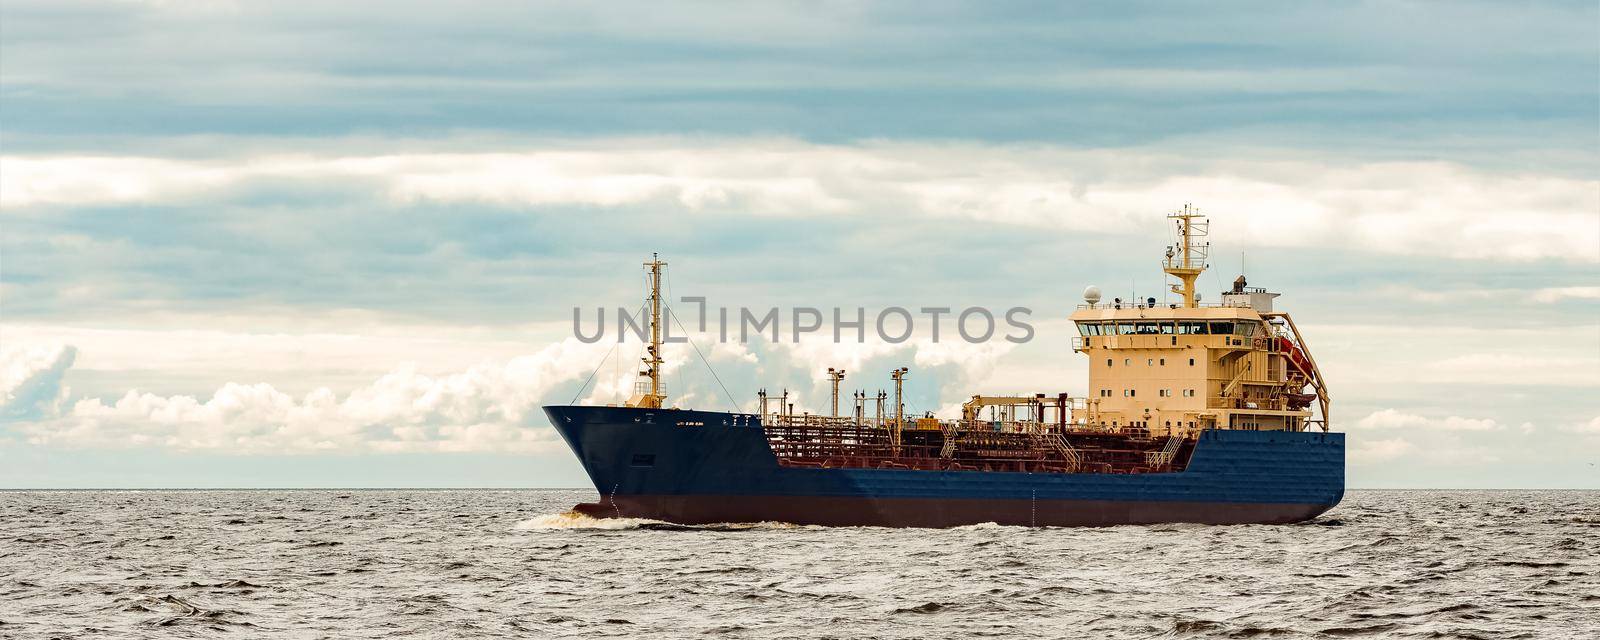 Blue tanker. Toxic substances and petroleum products transfer